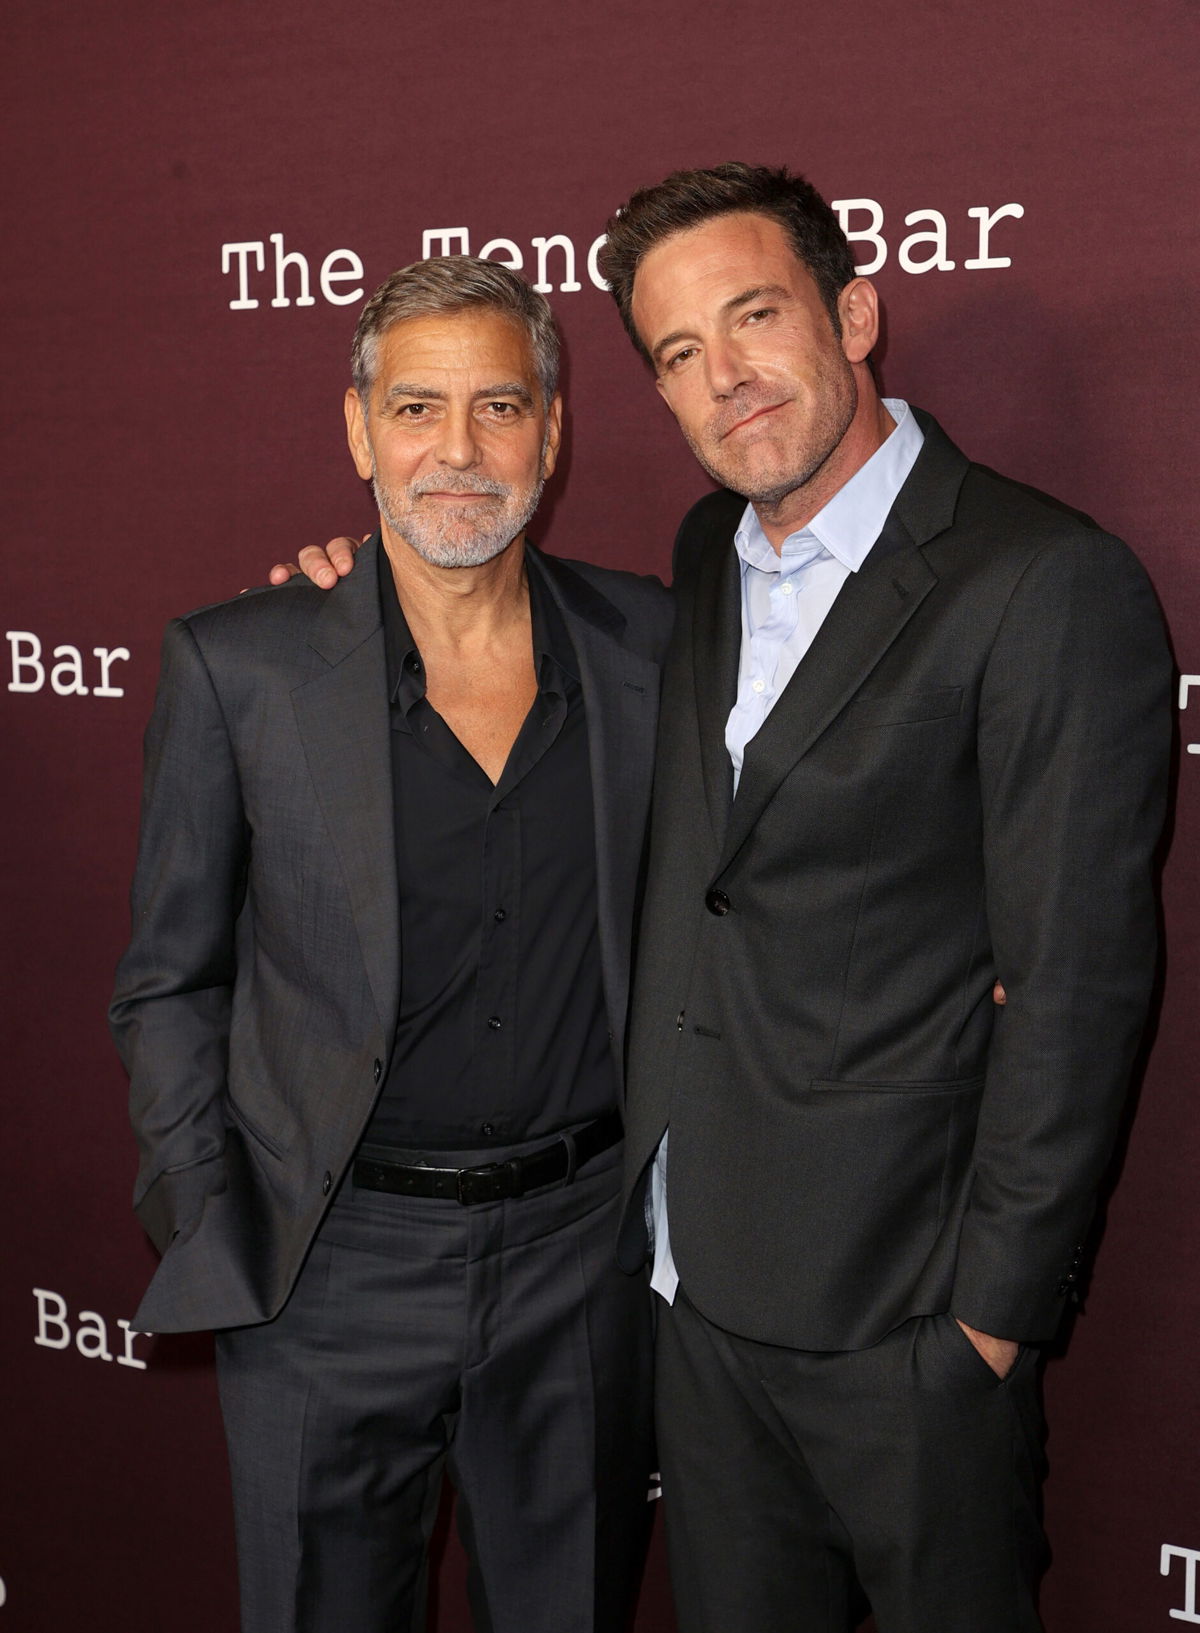 <i>Kevin Winter/Getty Images</i><br/>George Clooney (L) and Ben Affleck (R) at the premiere of their film 